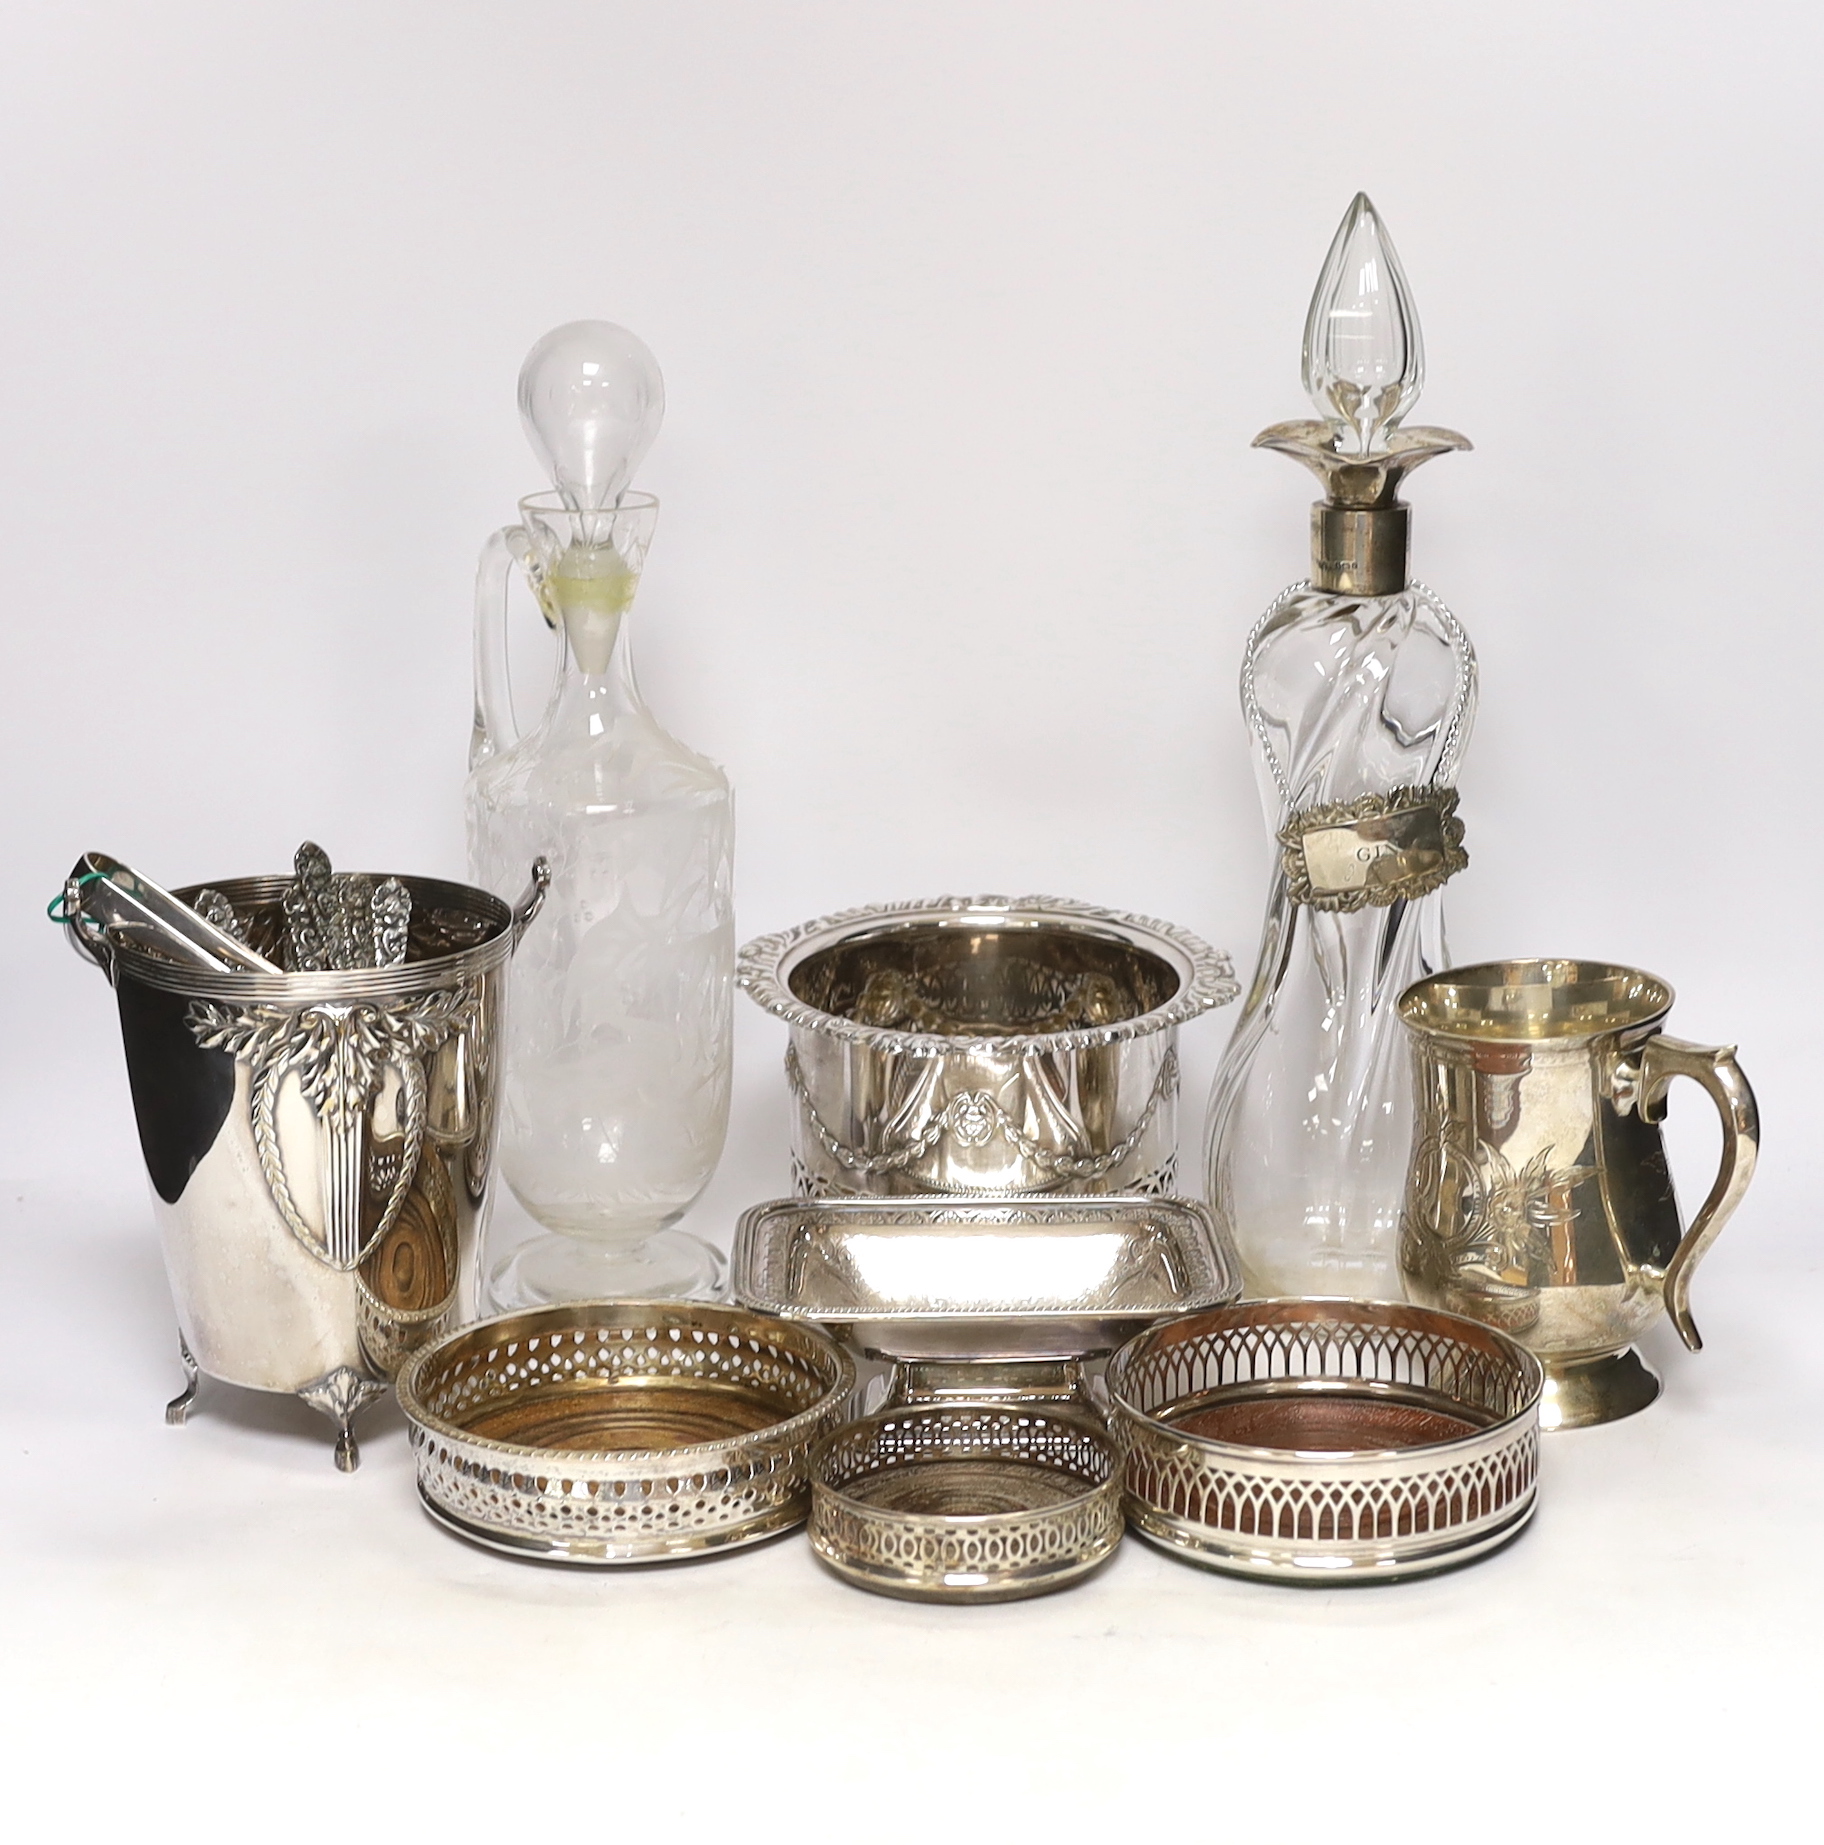 Two decanters; one with silver mount and one with etched body, together four wine coasters, a bucket raised on four feet, etc.